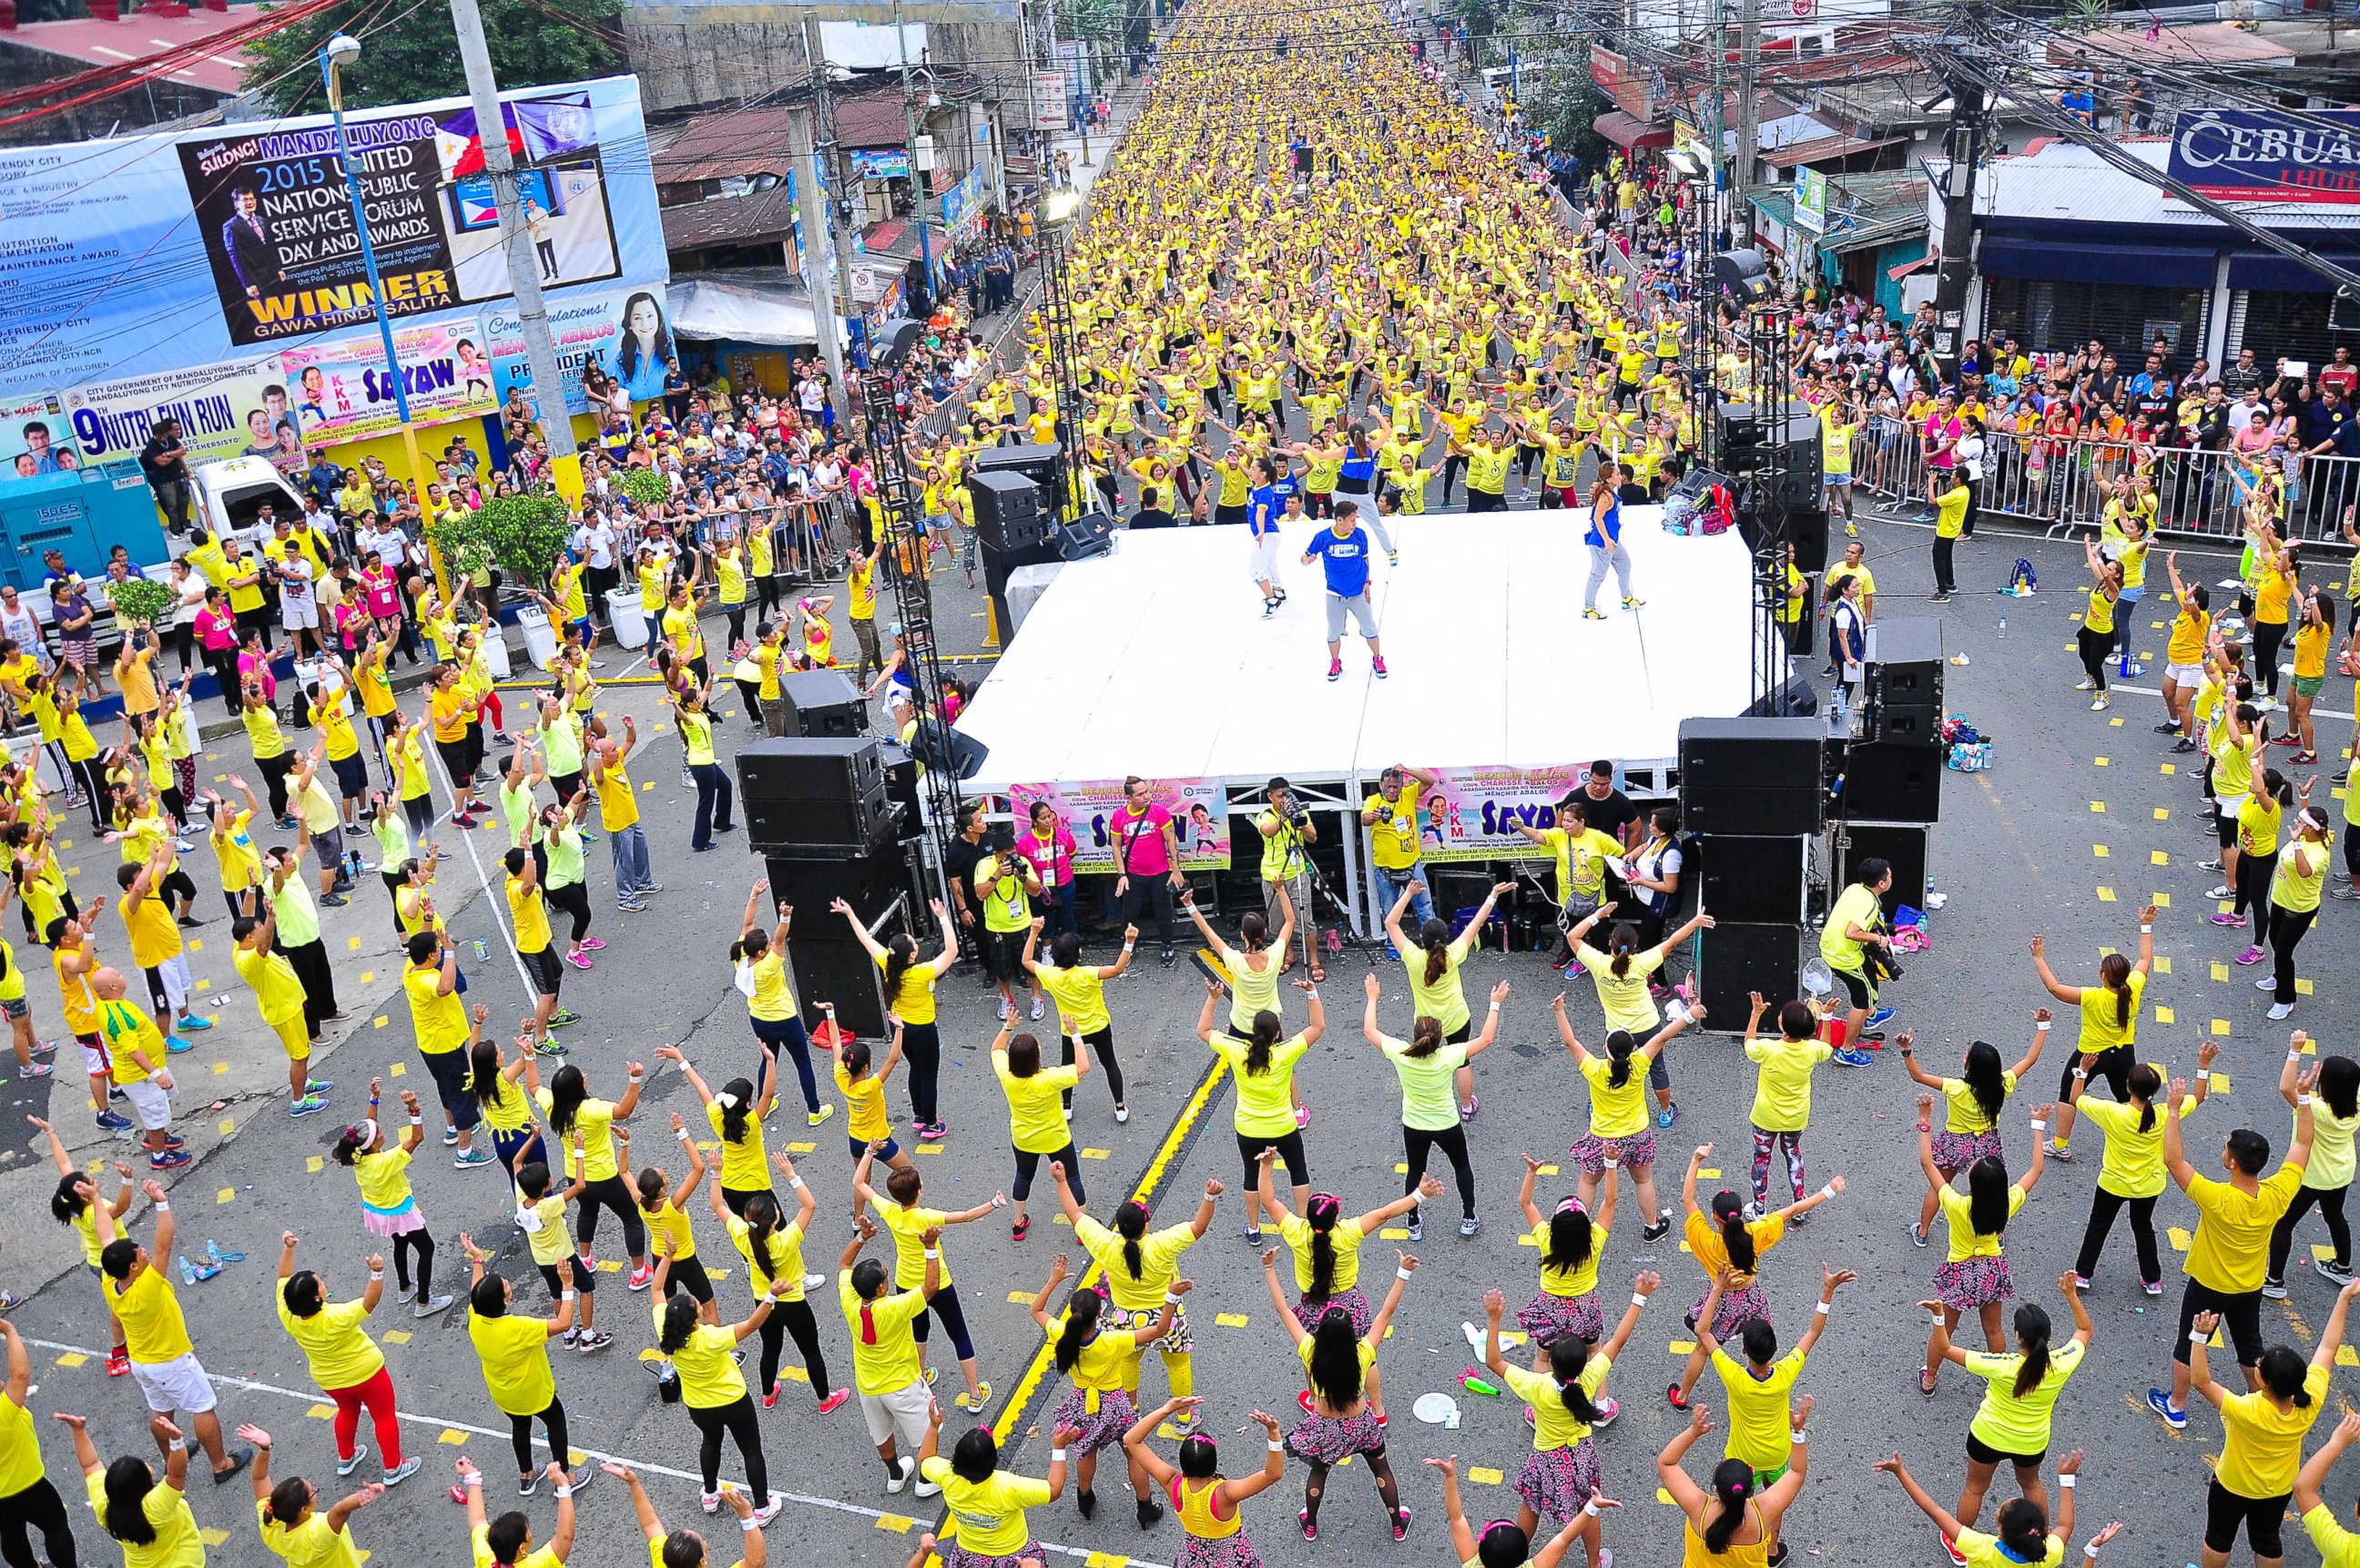 PHOTO: A total of 84 licensed Zumba instructors from the Philippine Zumba Network practiced for 2 months.